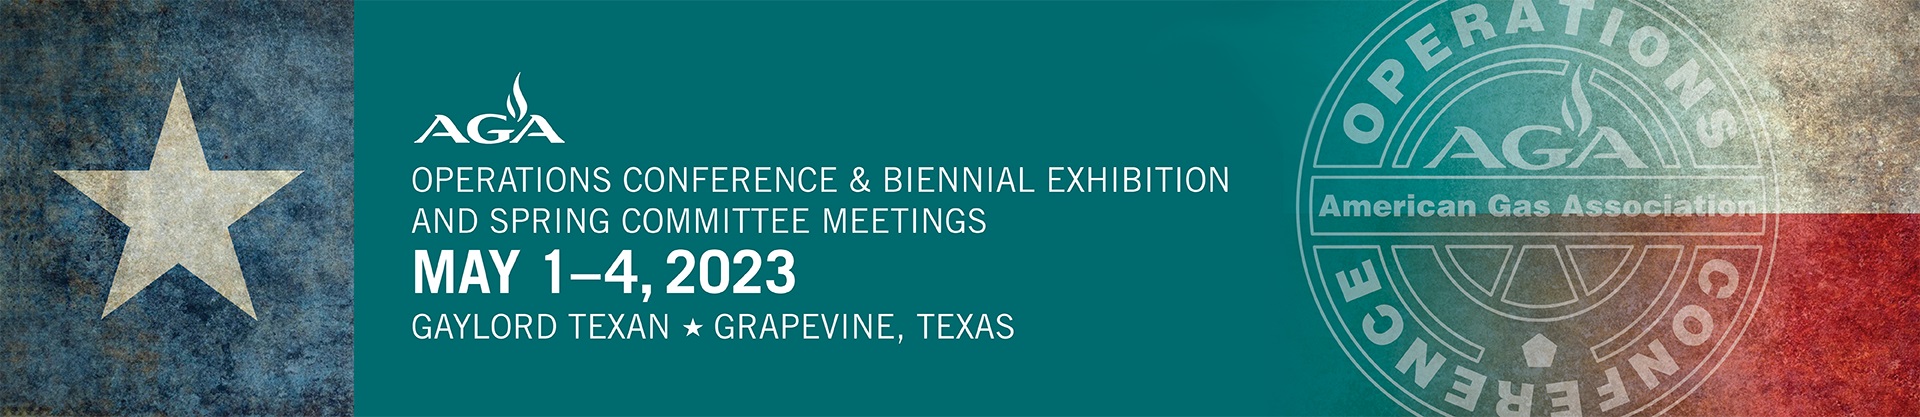 2023 AGA Operations Conference & Biennial Exhibition